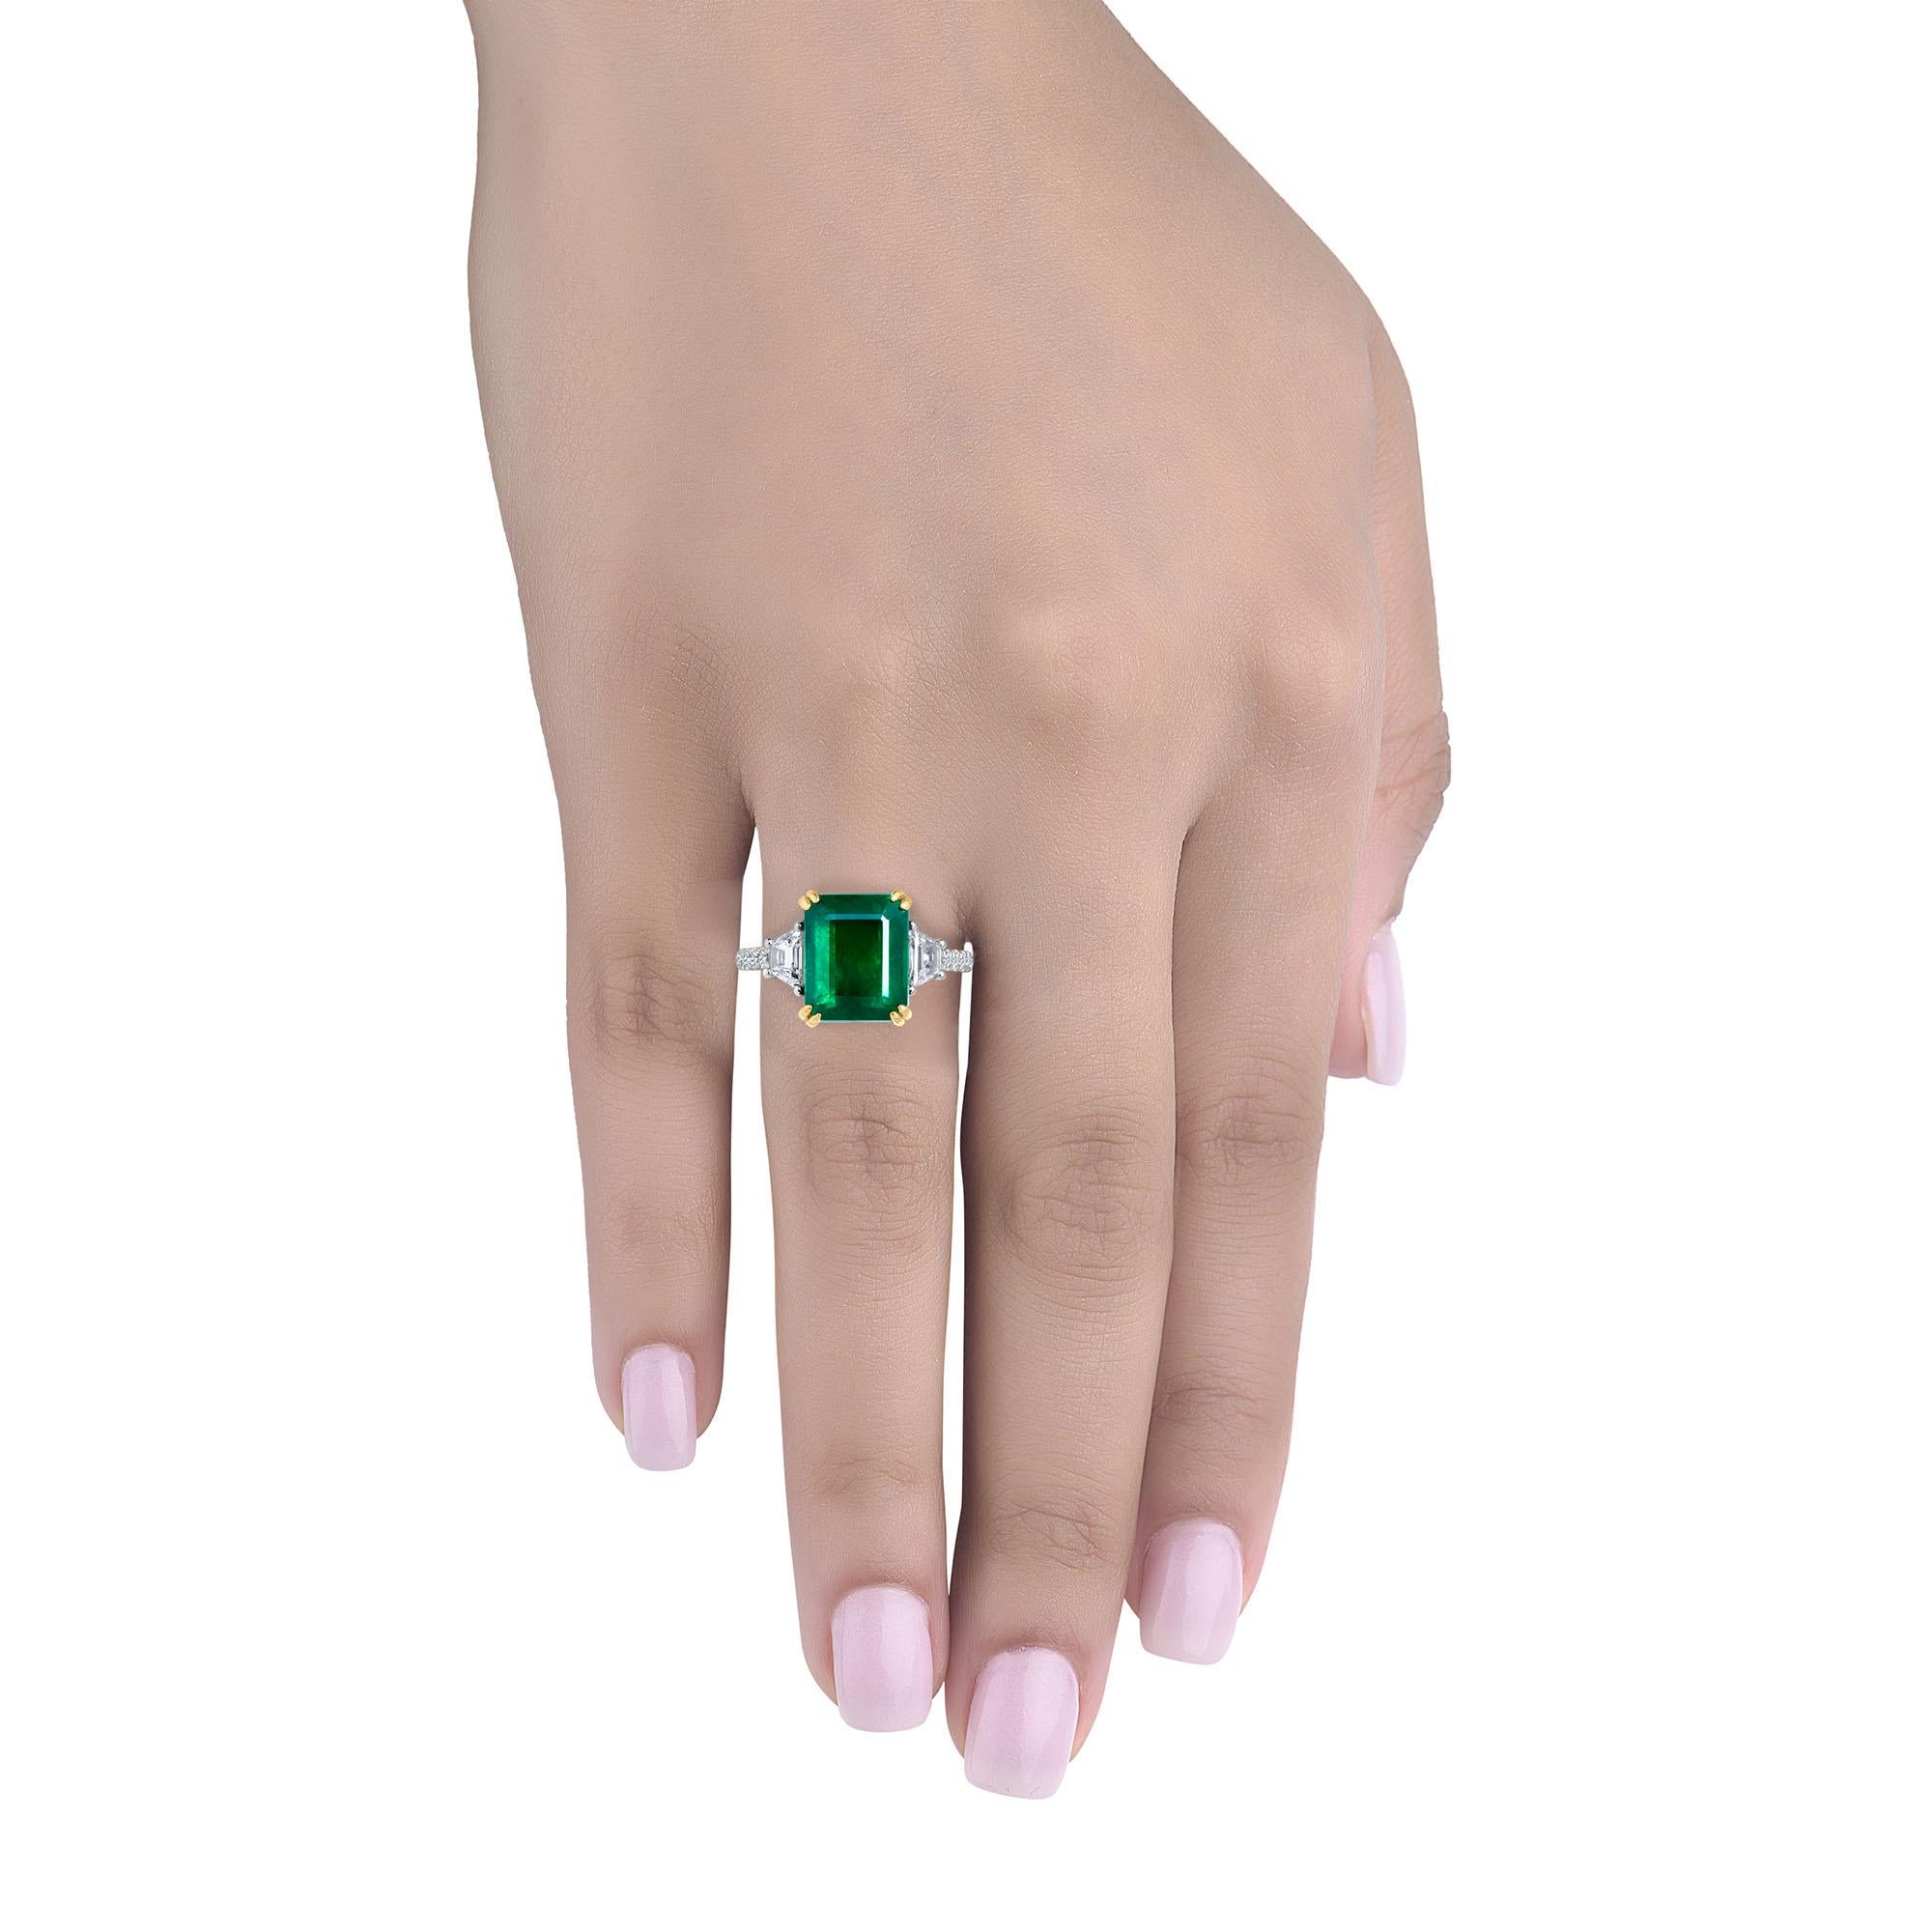 Hand made in the Emilio Jewelry Factory, A gorgeous deep green Certified Emerald cut Zambian Genuine Emerald 5.44 Carats set in the center. The emerald is very clean and completely eye clean. Center Emerald Dimensions: 11.20mm Long 
The Side